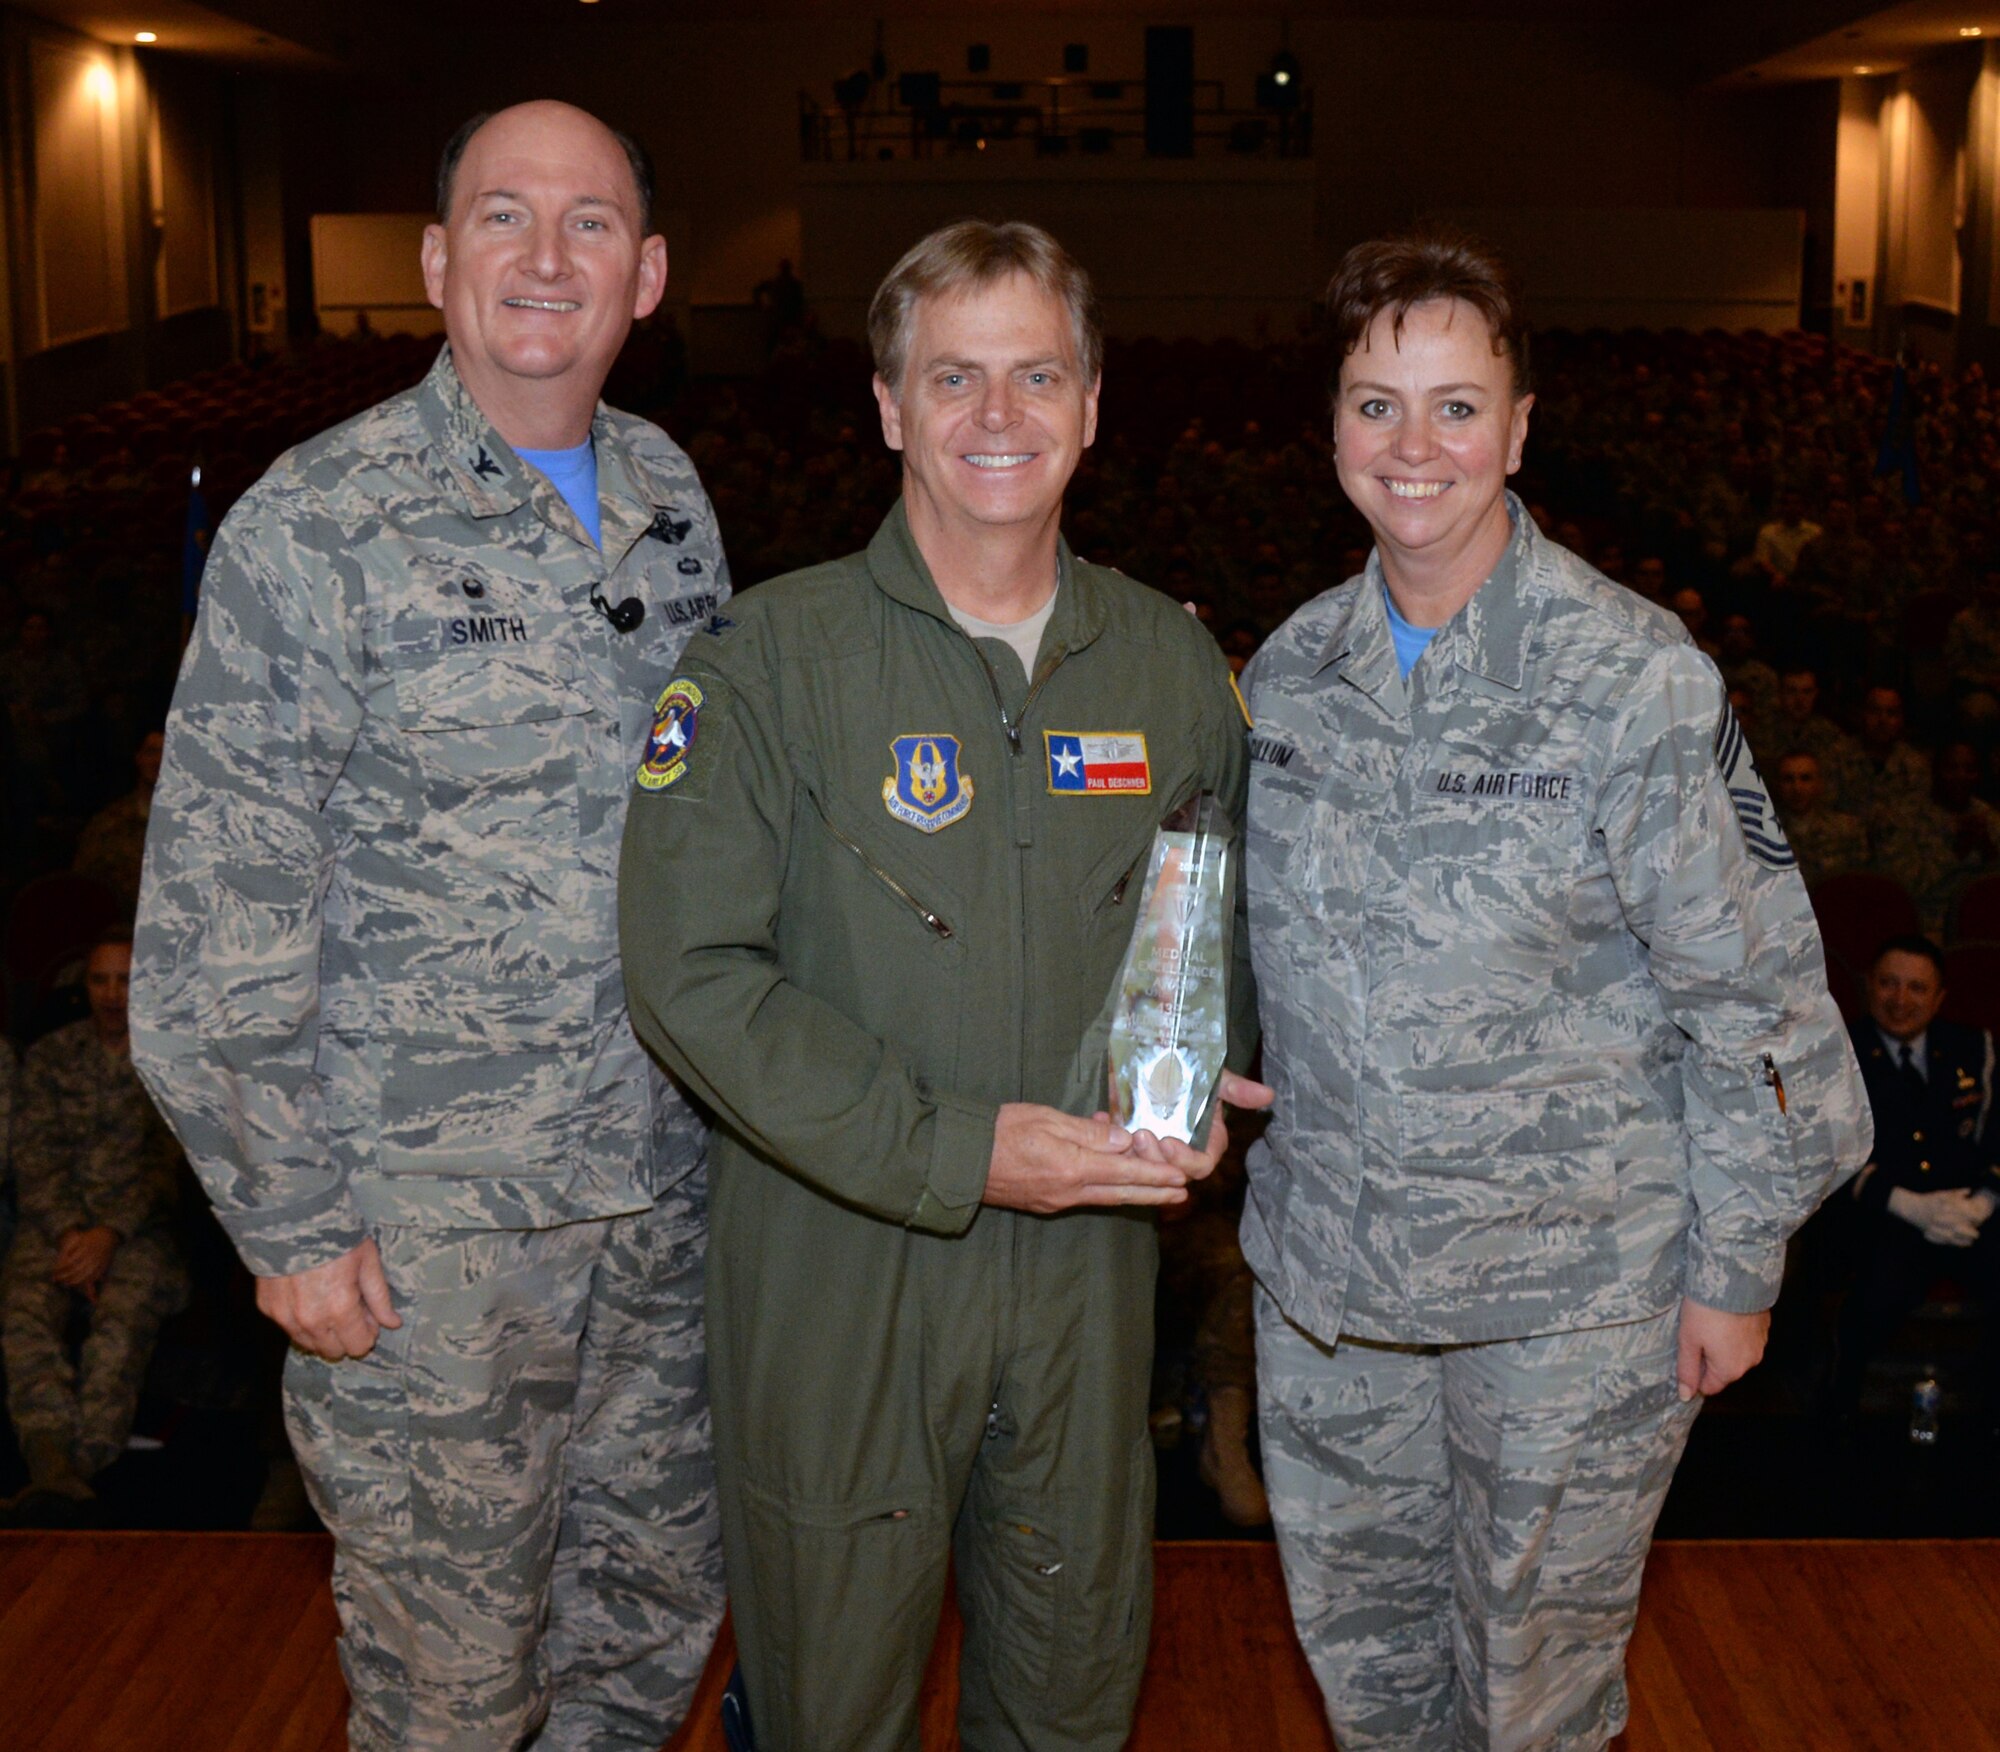 433rd Airlift Wing Commander Thomas K. Smith, Jr. and 433rd AW Command Chief Master Sgt. Shana Cullum stand with Col. Paul Deschner, 433rd Aeropace Medicine Squadron commander, who accepts the Raincross Trophy on behalf of the 433rd Medical Group, during commander's call Dec. 2, 2018 in the Bob Hope theater at Joint Base San Antonio-Lackland, Texas.